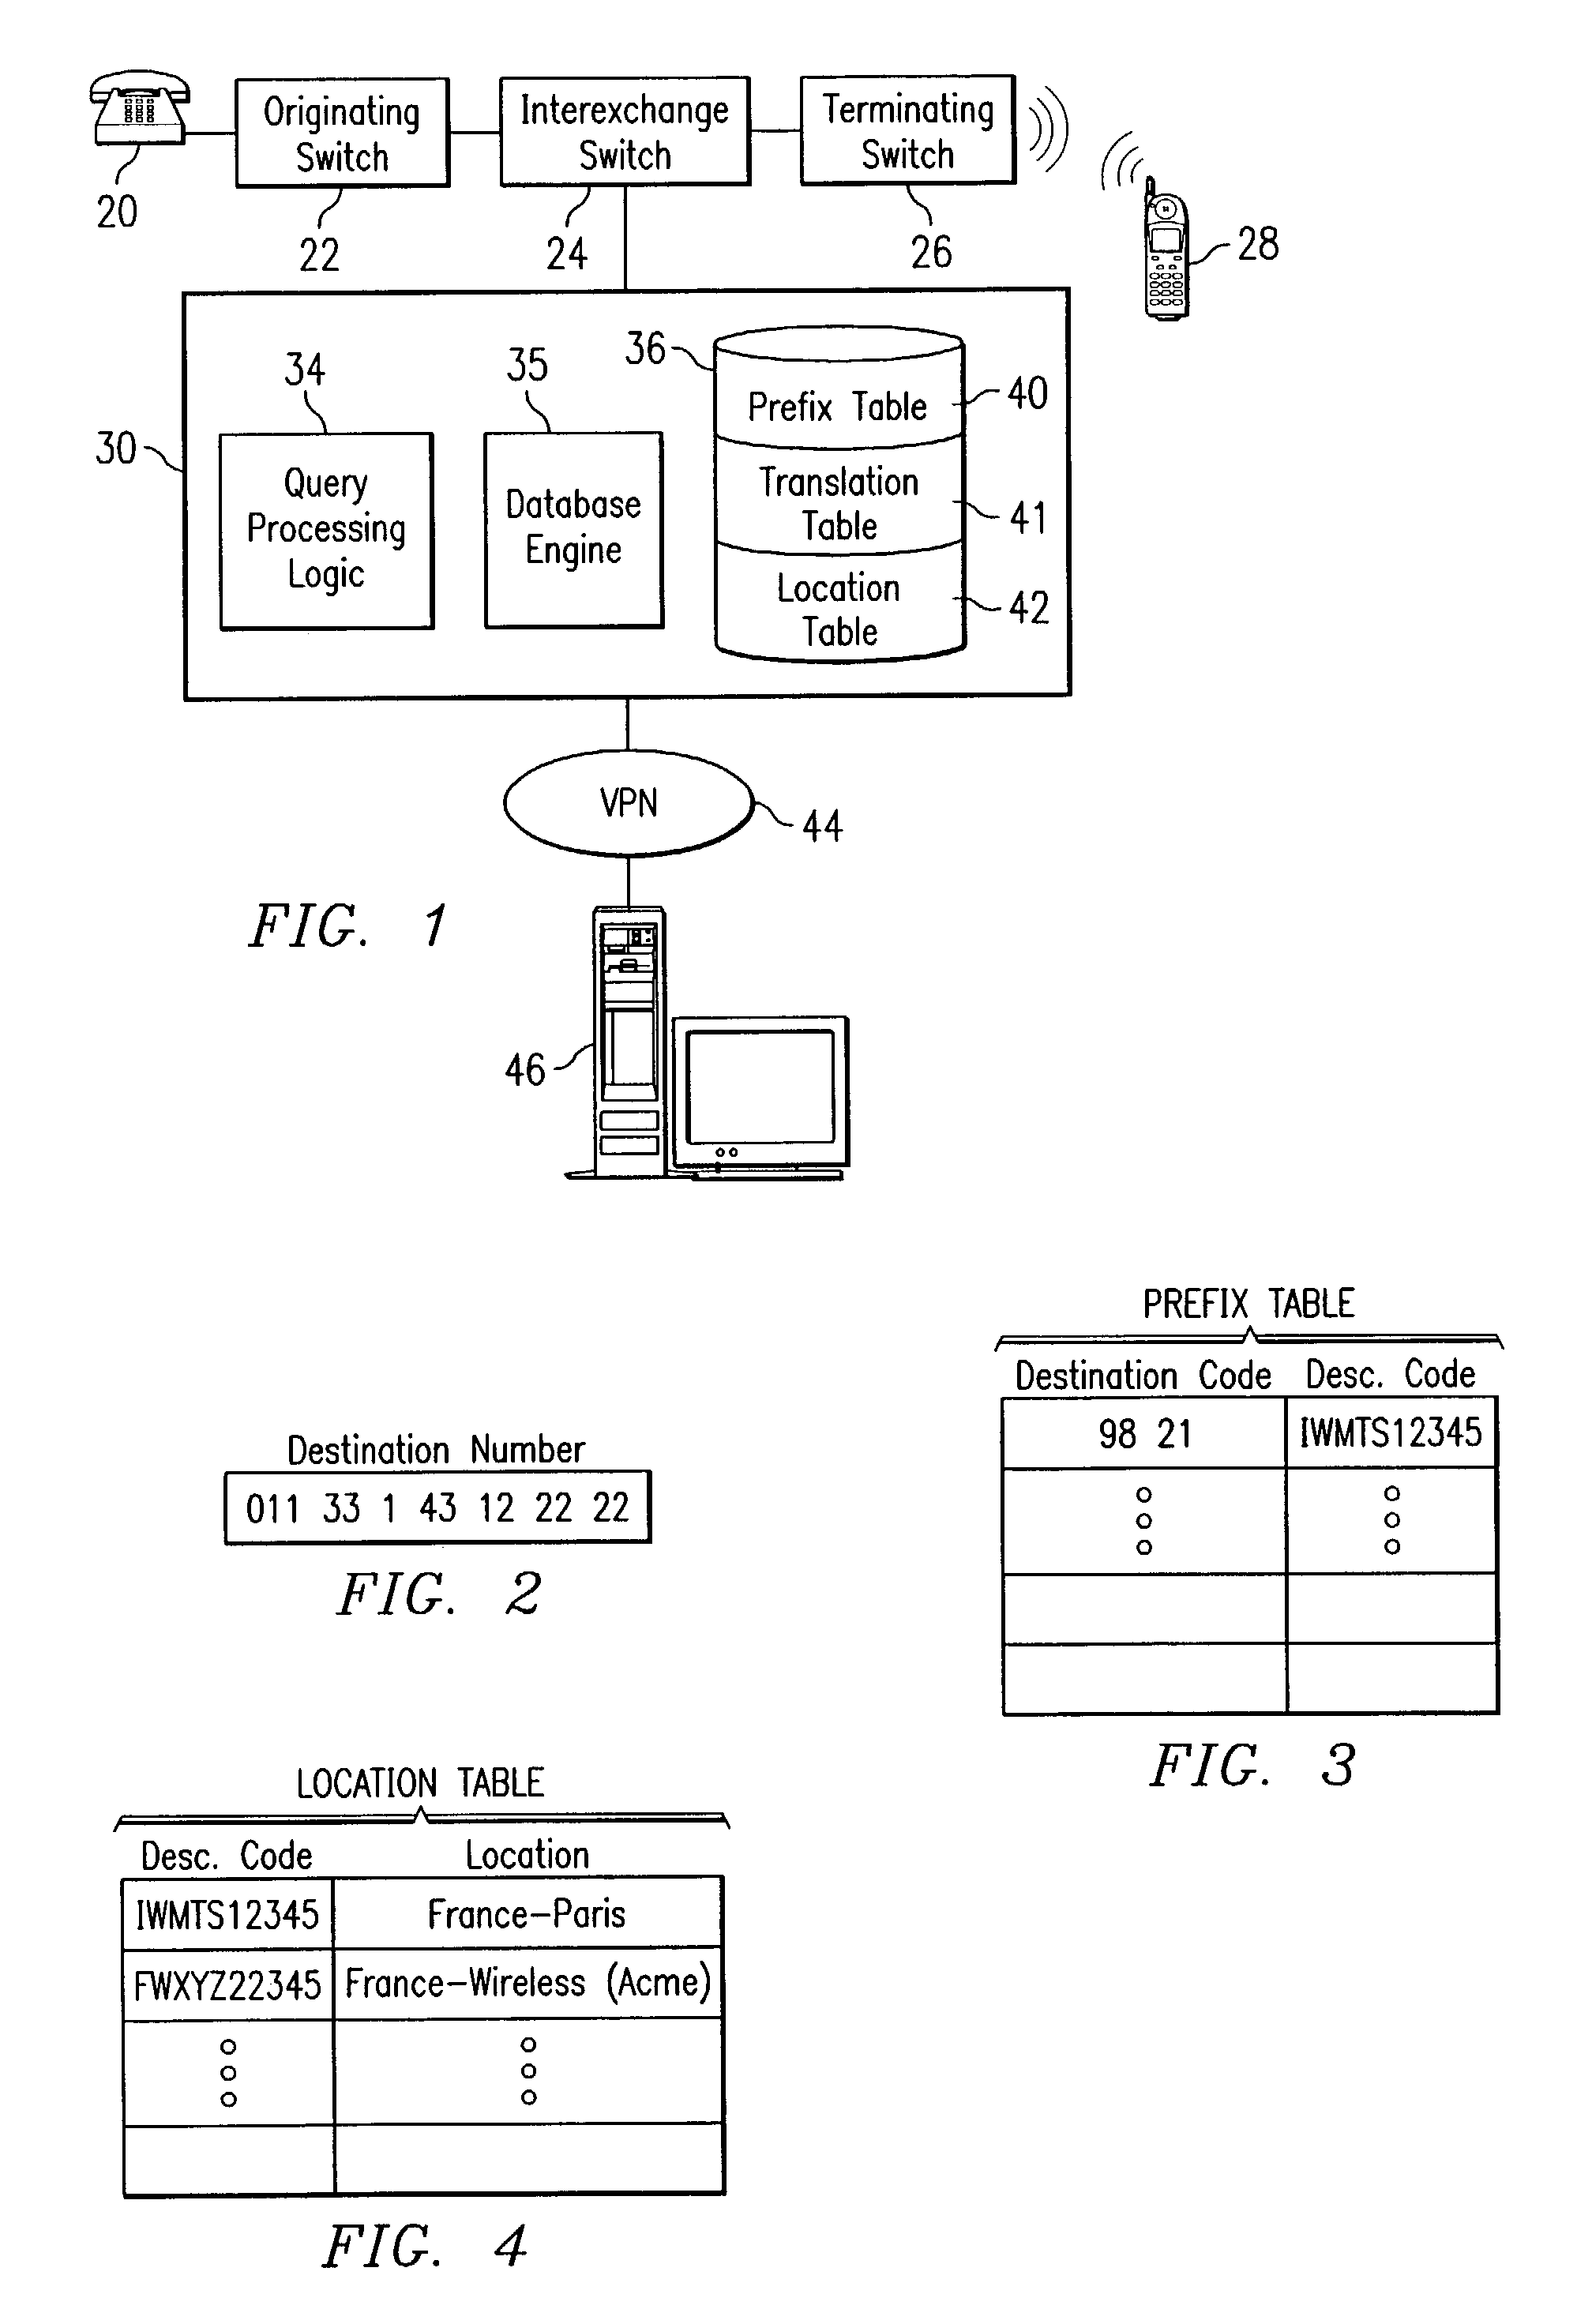 System and method for determining characteristics of international calls